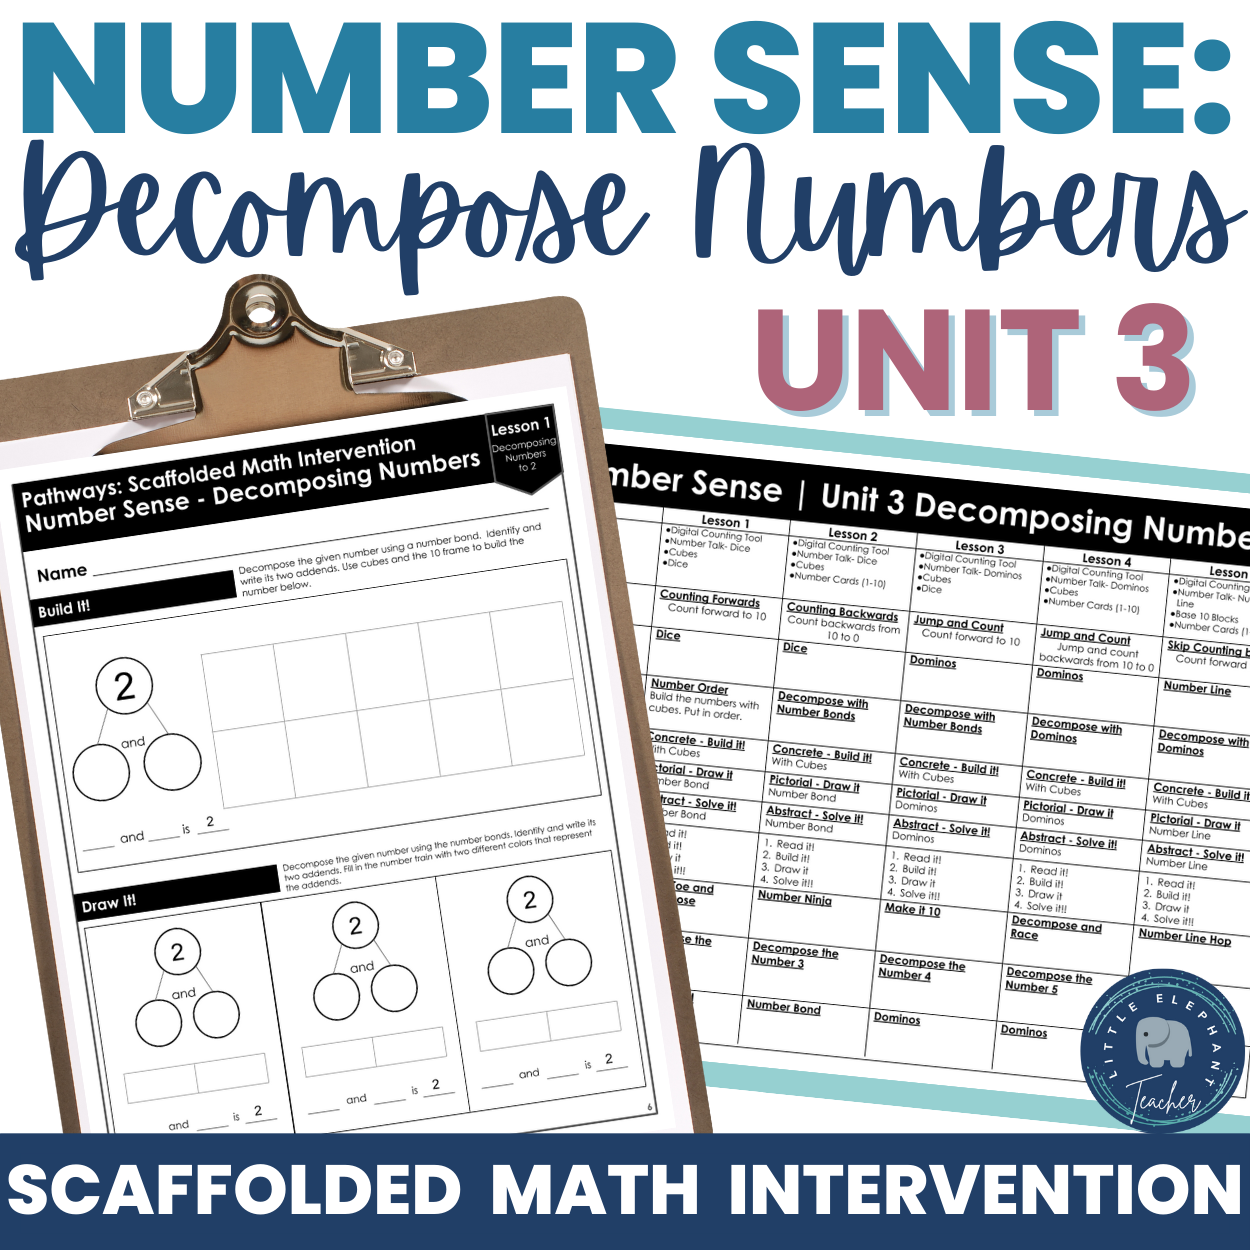 Unit 3: Decompose Numbers